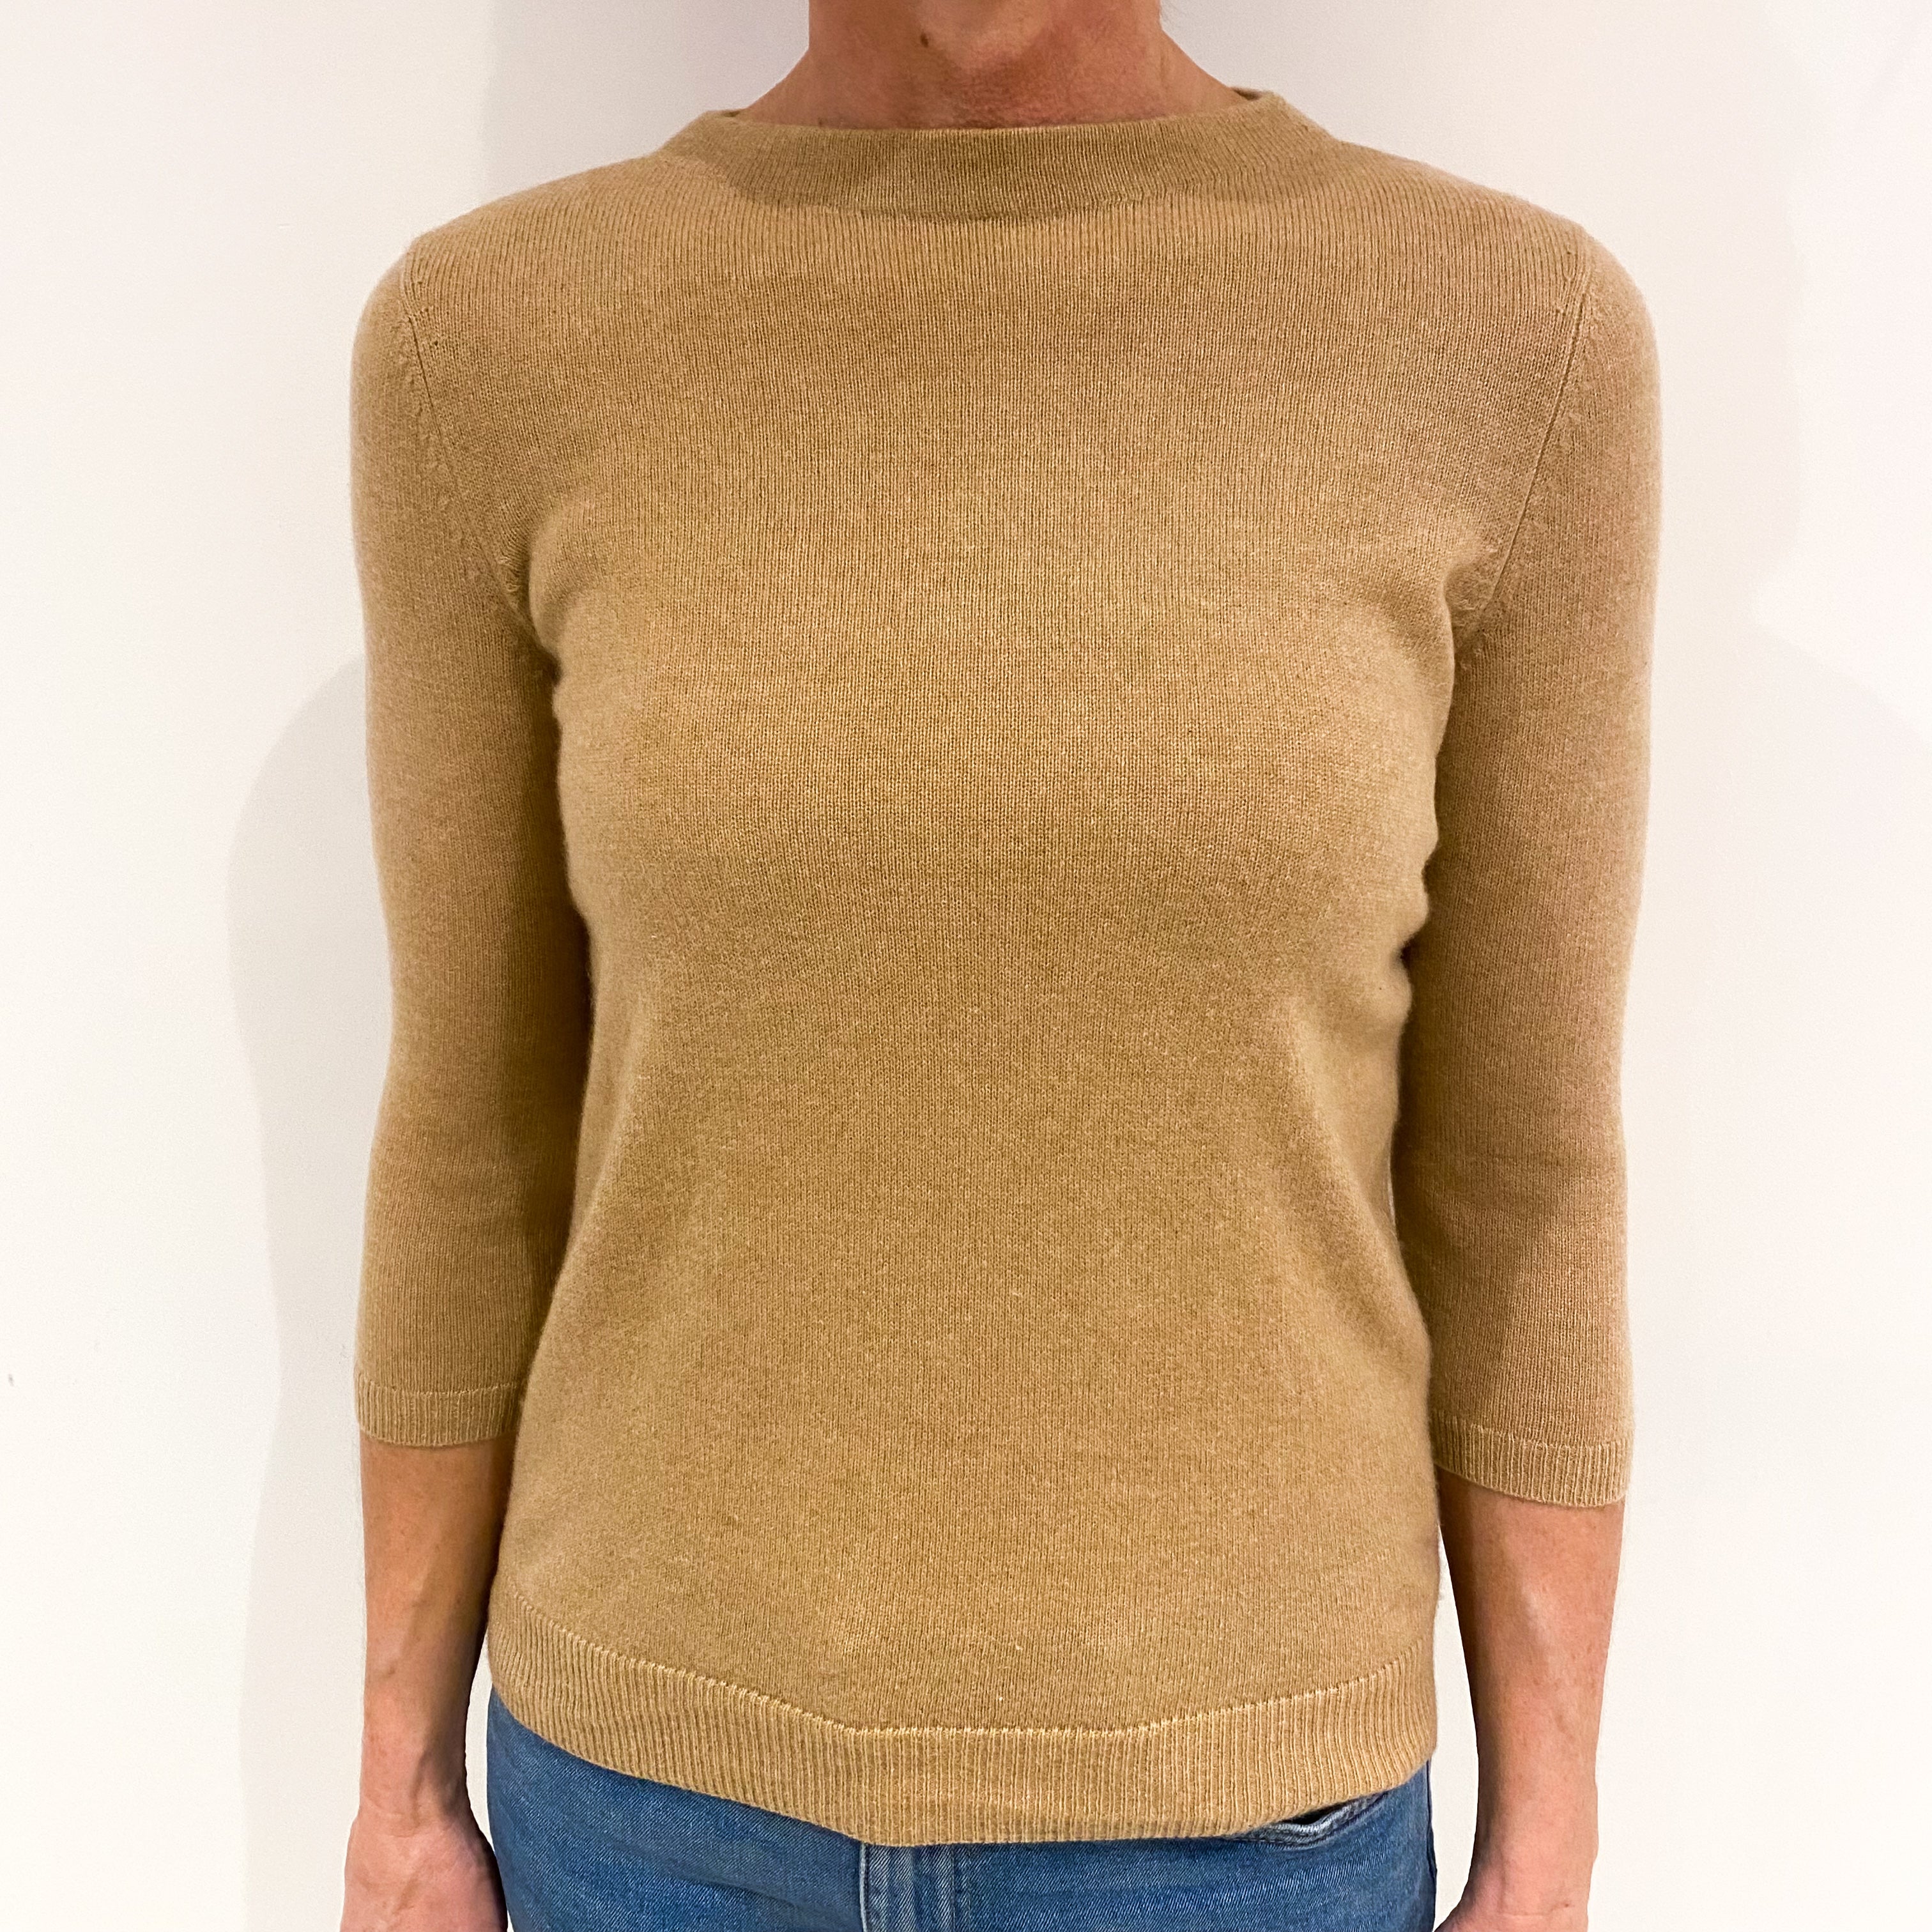 Caramel Brown Cashmere 3/4 Sleeve Crew Neck Jumper Small